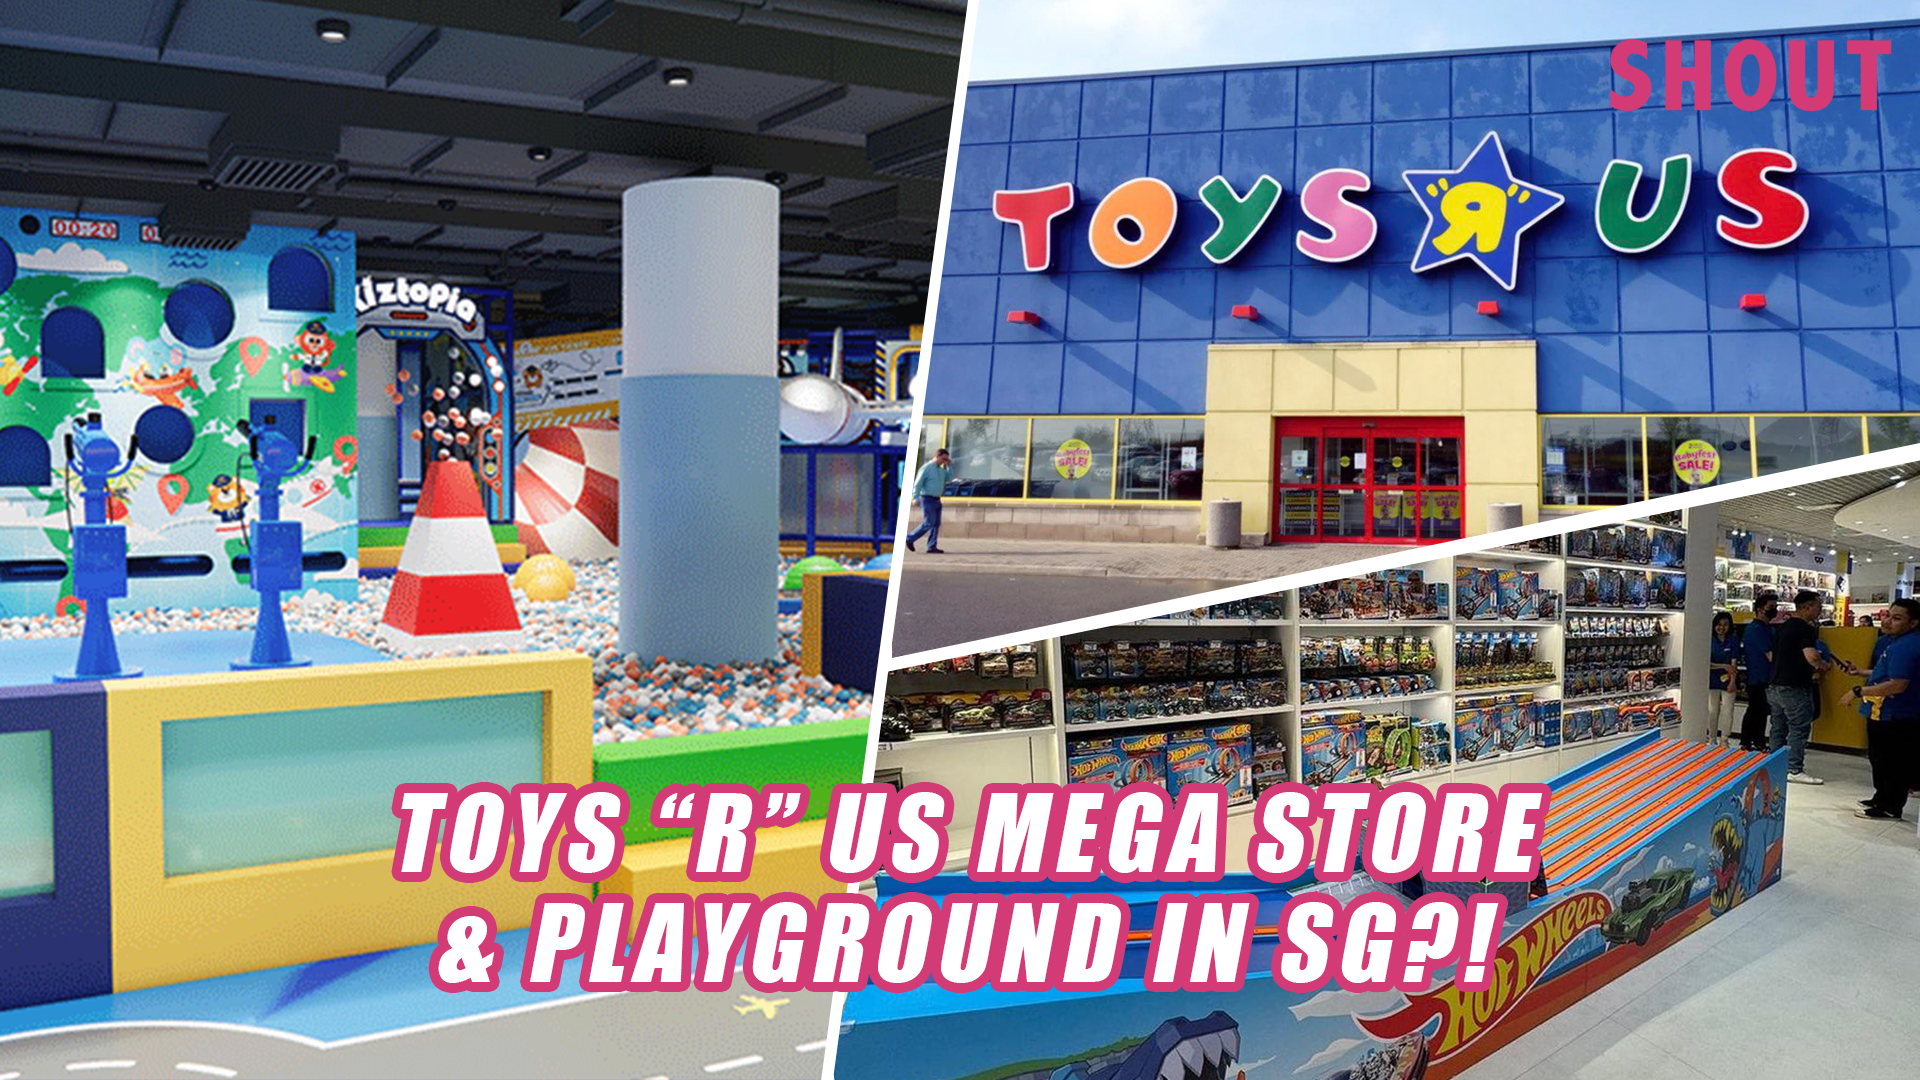 ToysRUs Opens At Jewel Changi Airport With Mega Indoor Playground And  Exclusive Merchandise